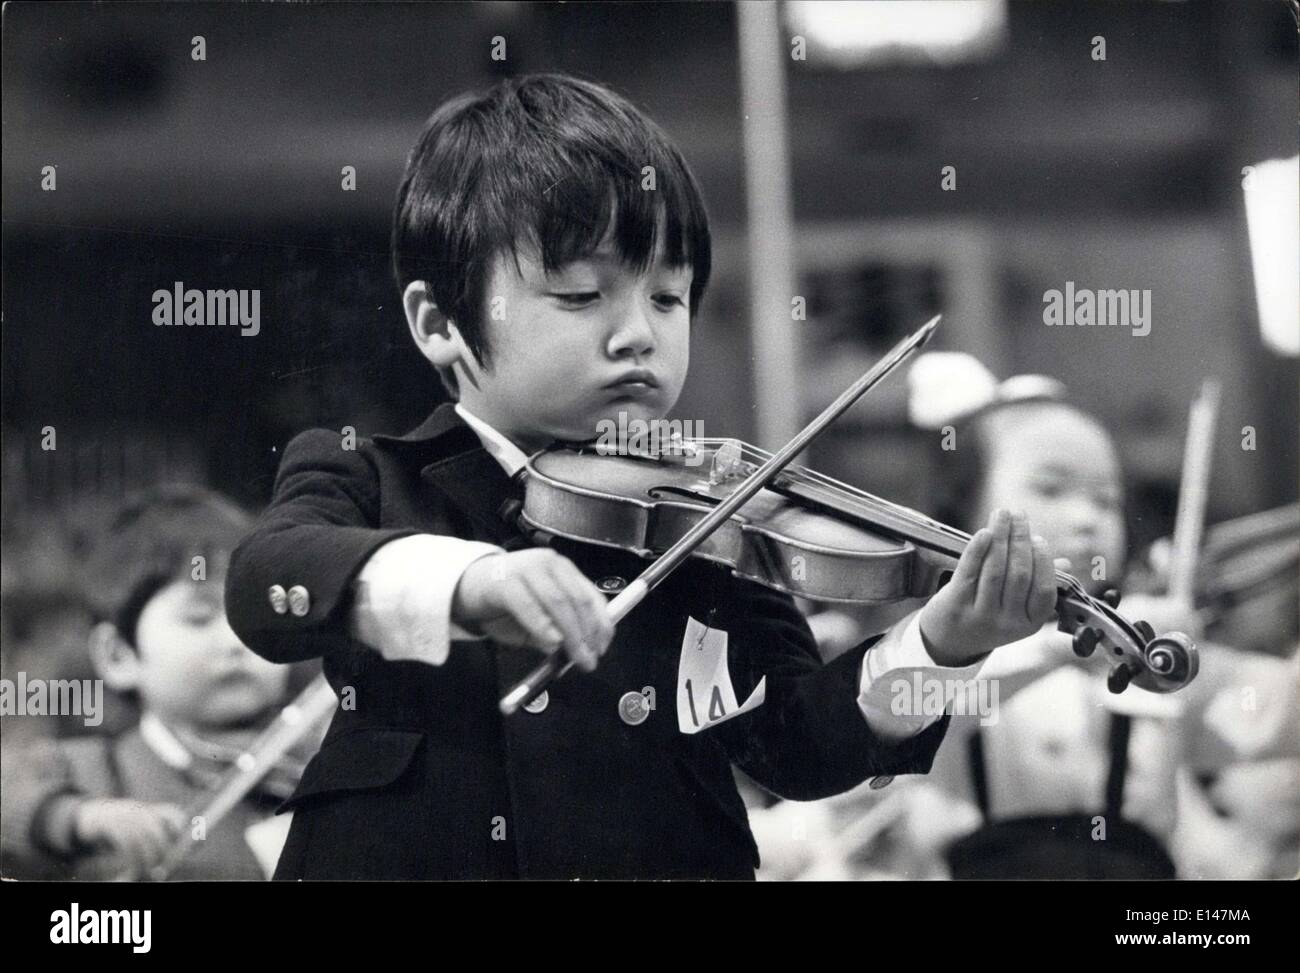 Apr. 17, 2012 - Little Fiddlers Make Big Music: Some of the 2,000 young Japanese violinists - and a sprinkling of foreign children living in Japan - take part in a massed concert in Tokyo. The young musicians are pupils of several schools of music who give an annual concert en masse, before their parents and teachers. Stock Photo